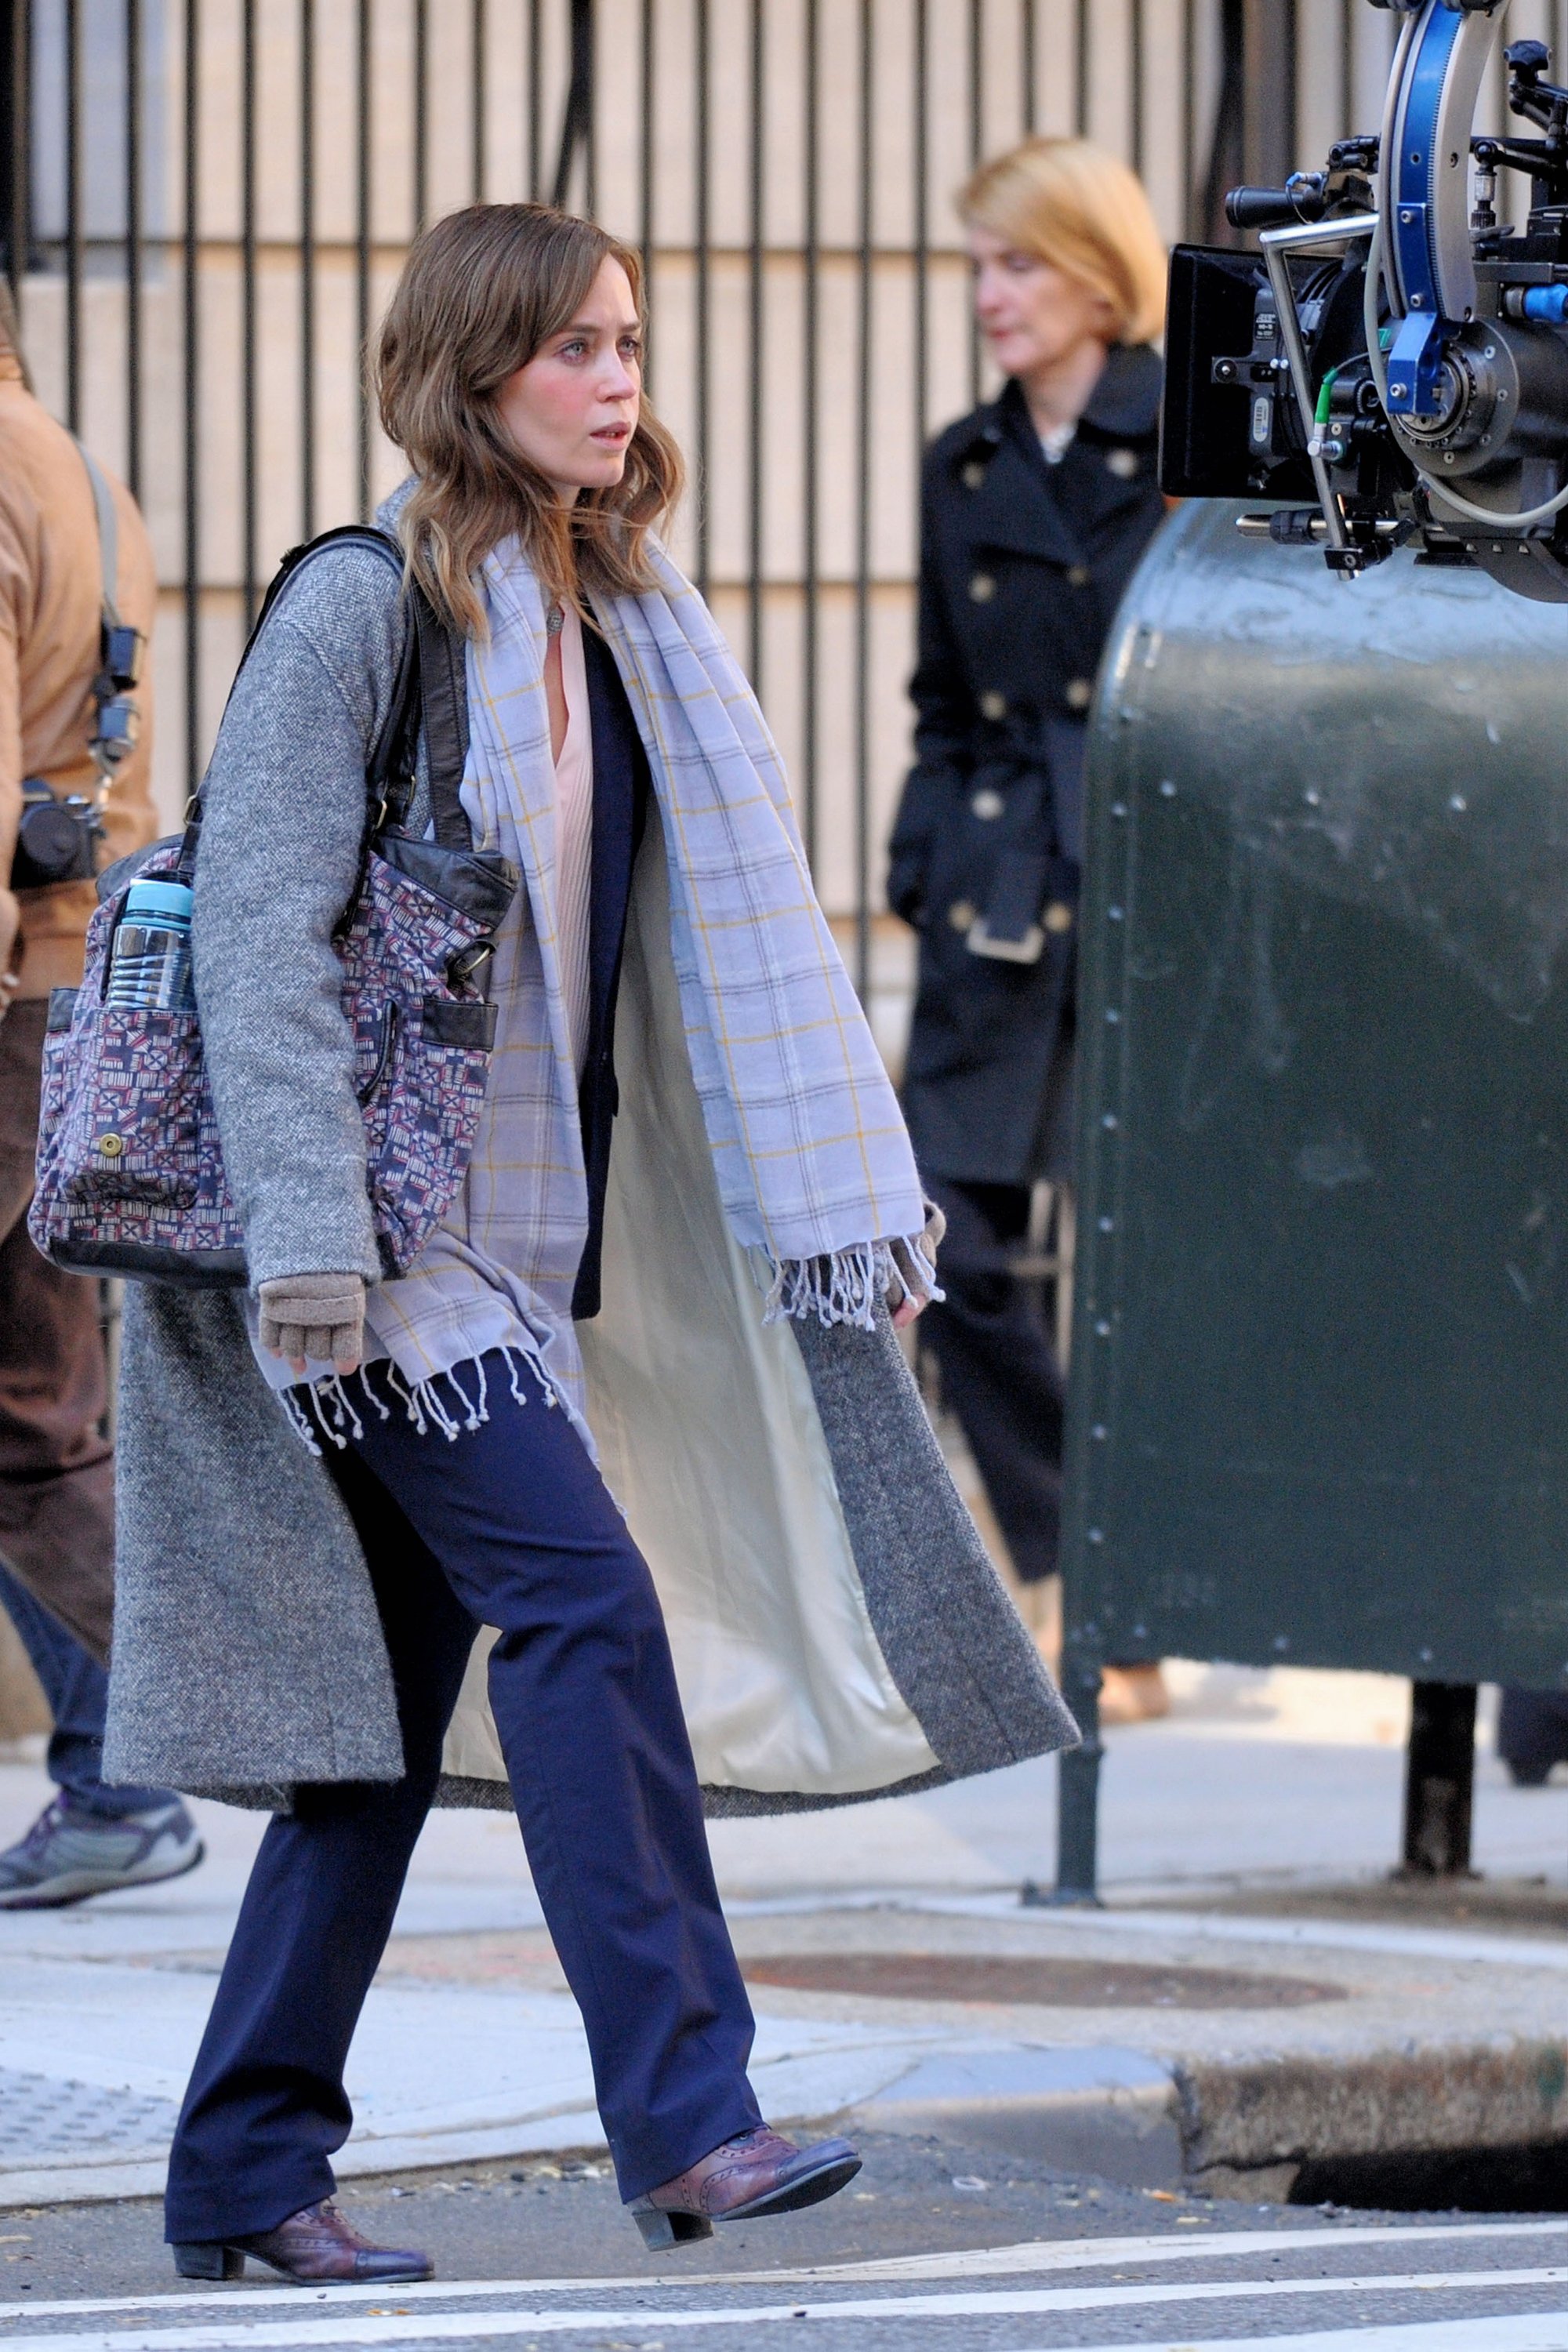 emily-blunt-the-girl-on-the-train-on-set-004.jpg